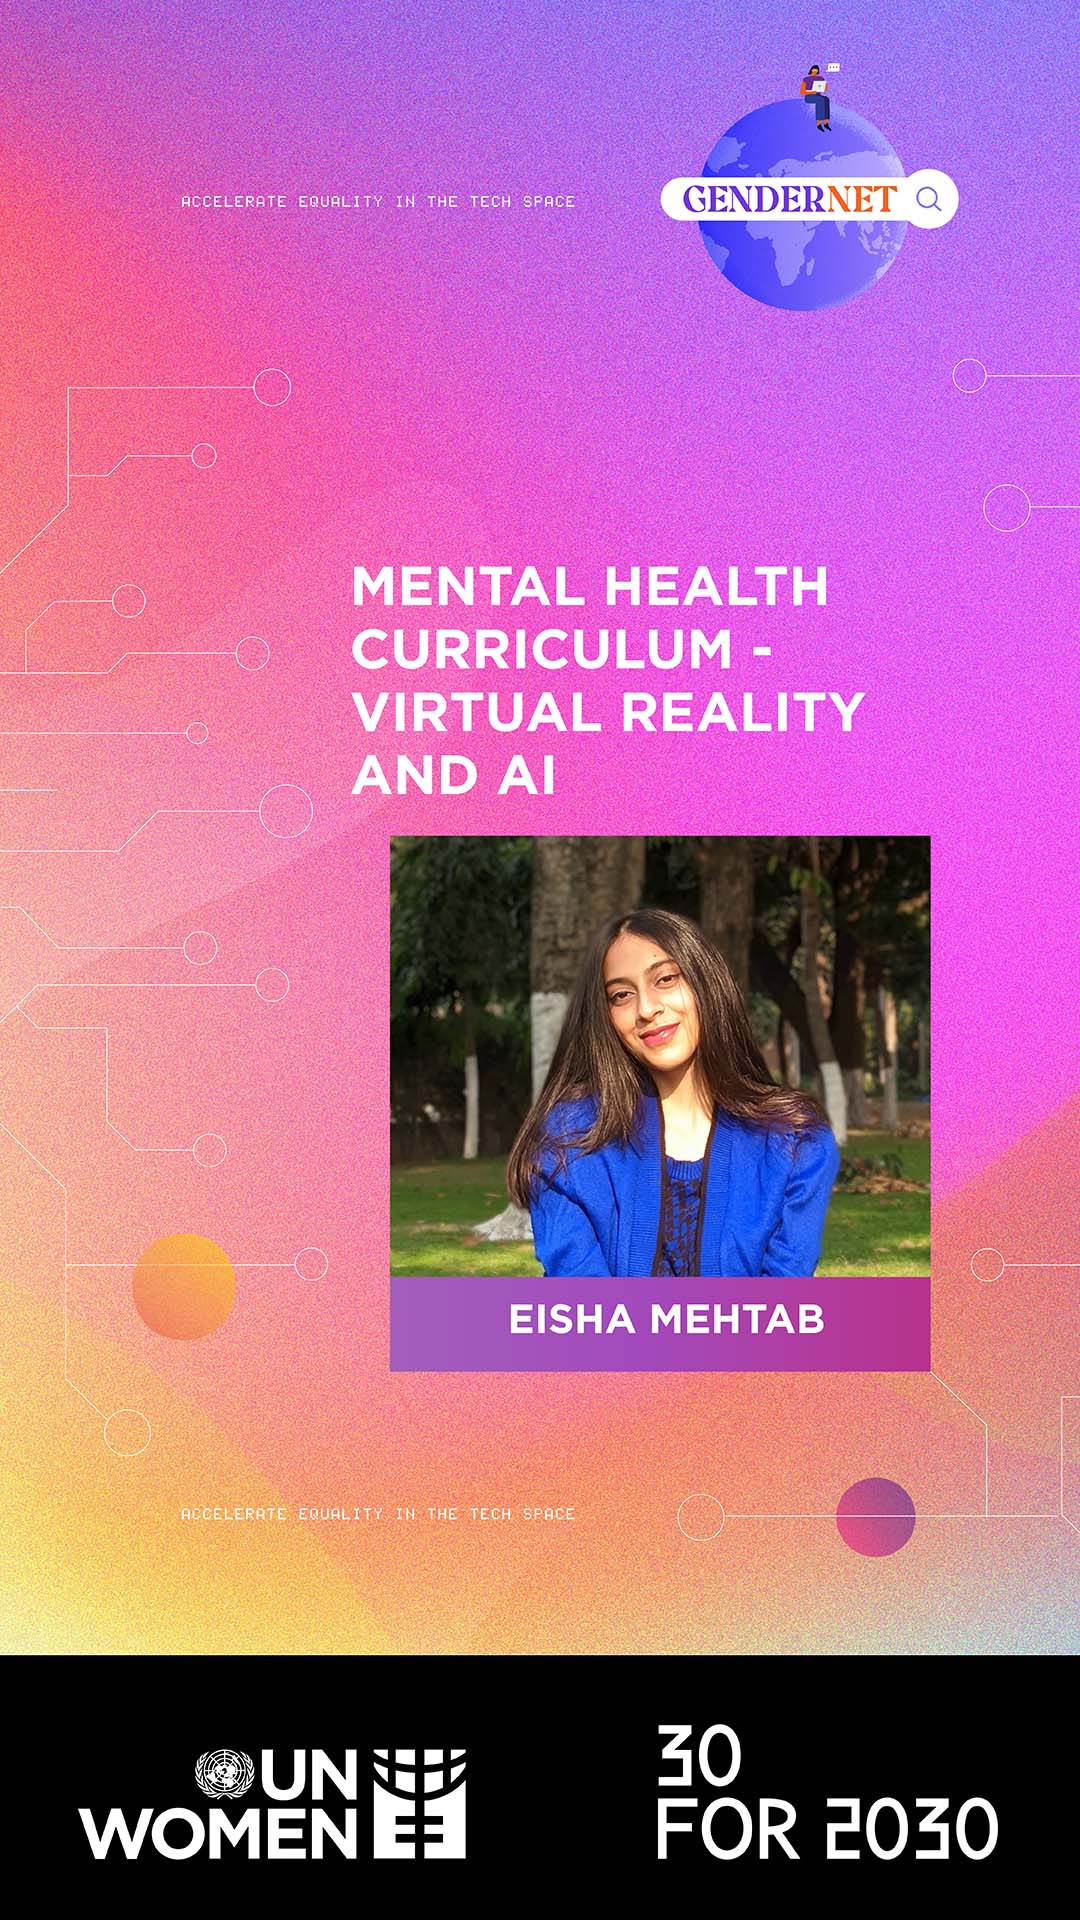 30 for 2030: Mental Health Curriculum, Virtual Reality and AI